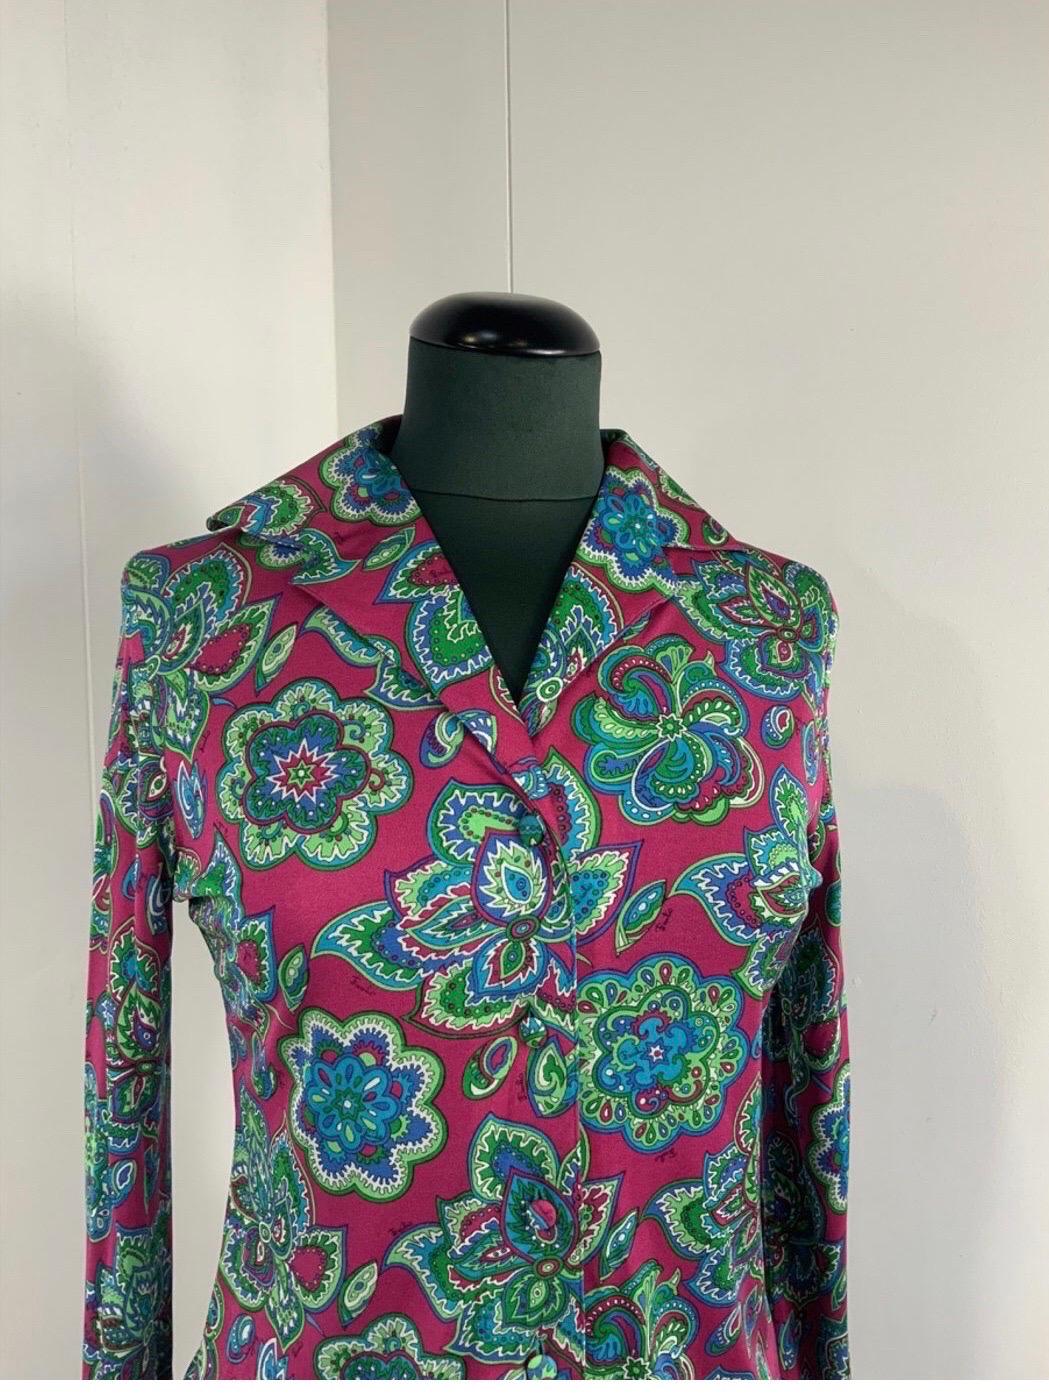 vintage 70s.
in silk. beautiful colors.
indicated size 8.
wears an Italian 40/42.
shoulders 40.
bust 45.
length 66
sleeve 67
good general condition, shows signs of normal use. As shown in the photo, it has holes in one arm below the shoulder